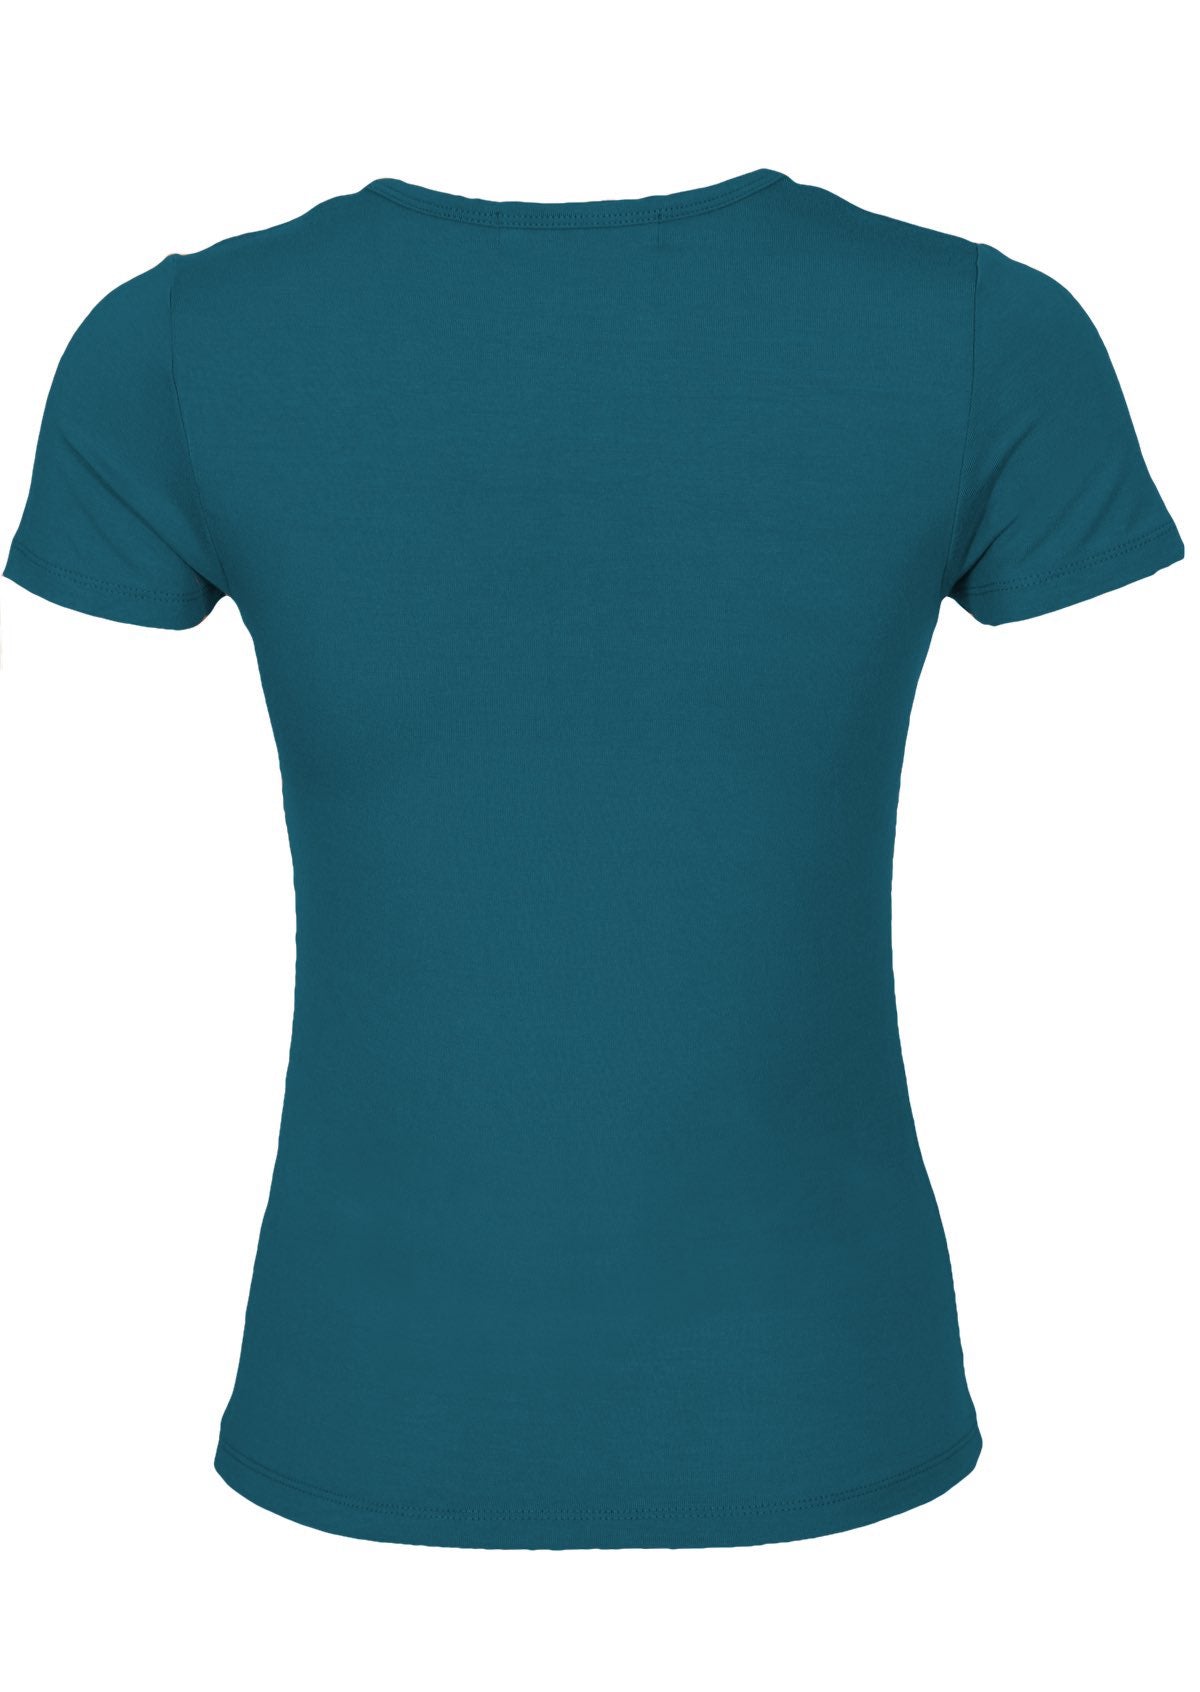 Back view fitted basic rayon teal women's t-shirt.